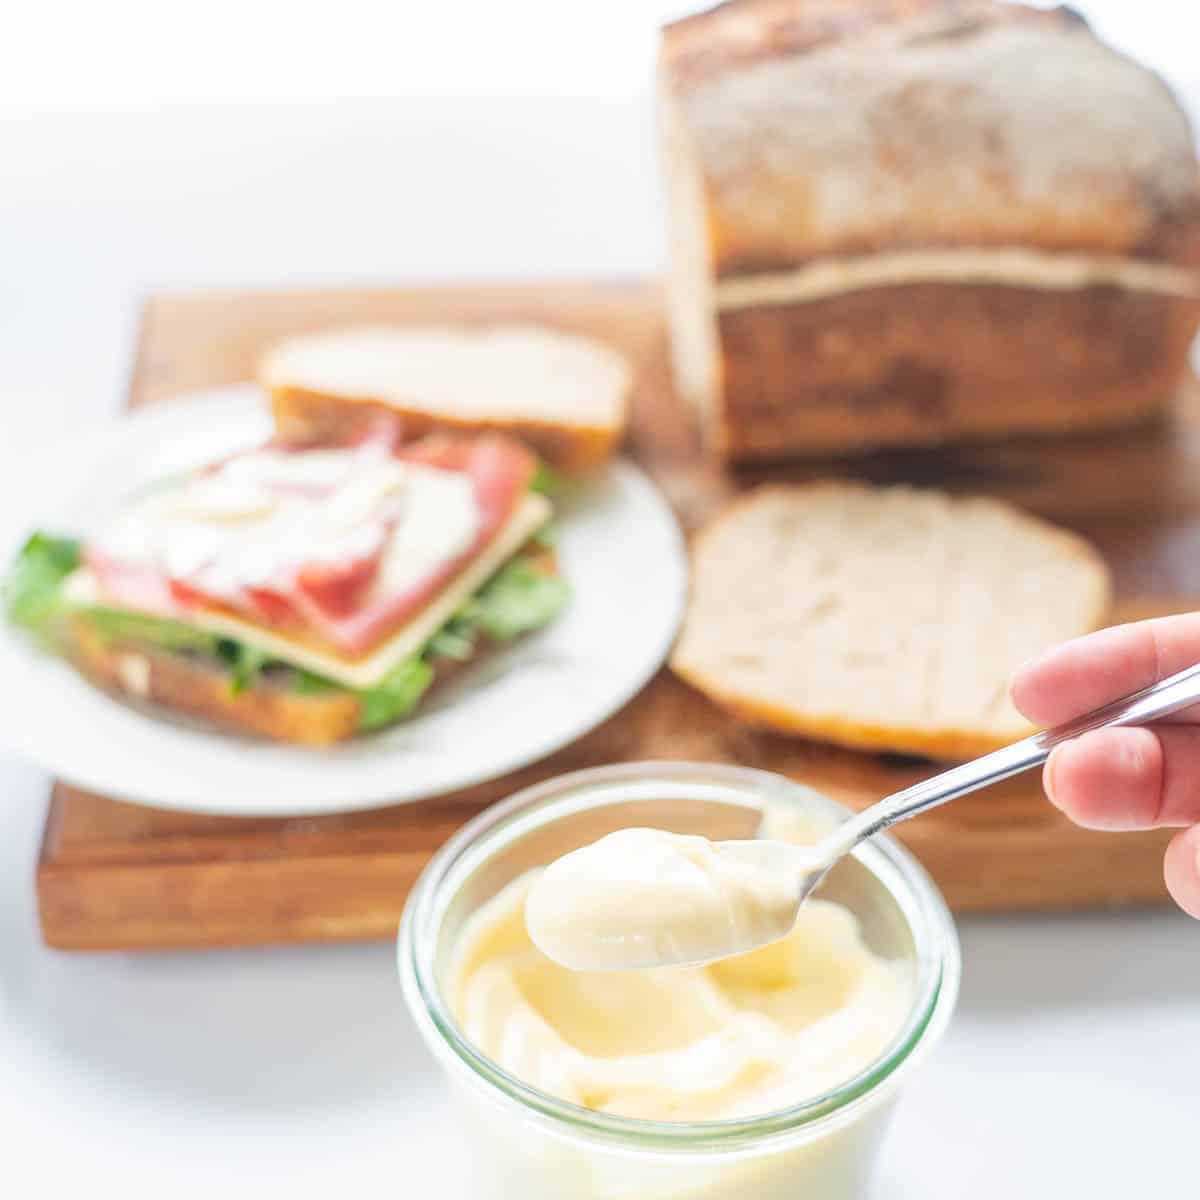 A spoonful of mayonnaise in front of a wooden board with a sandwich and loaf of bread.